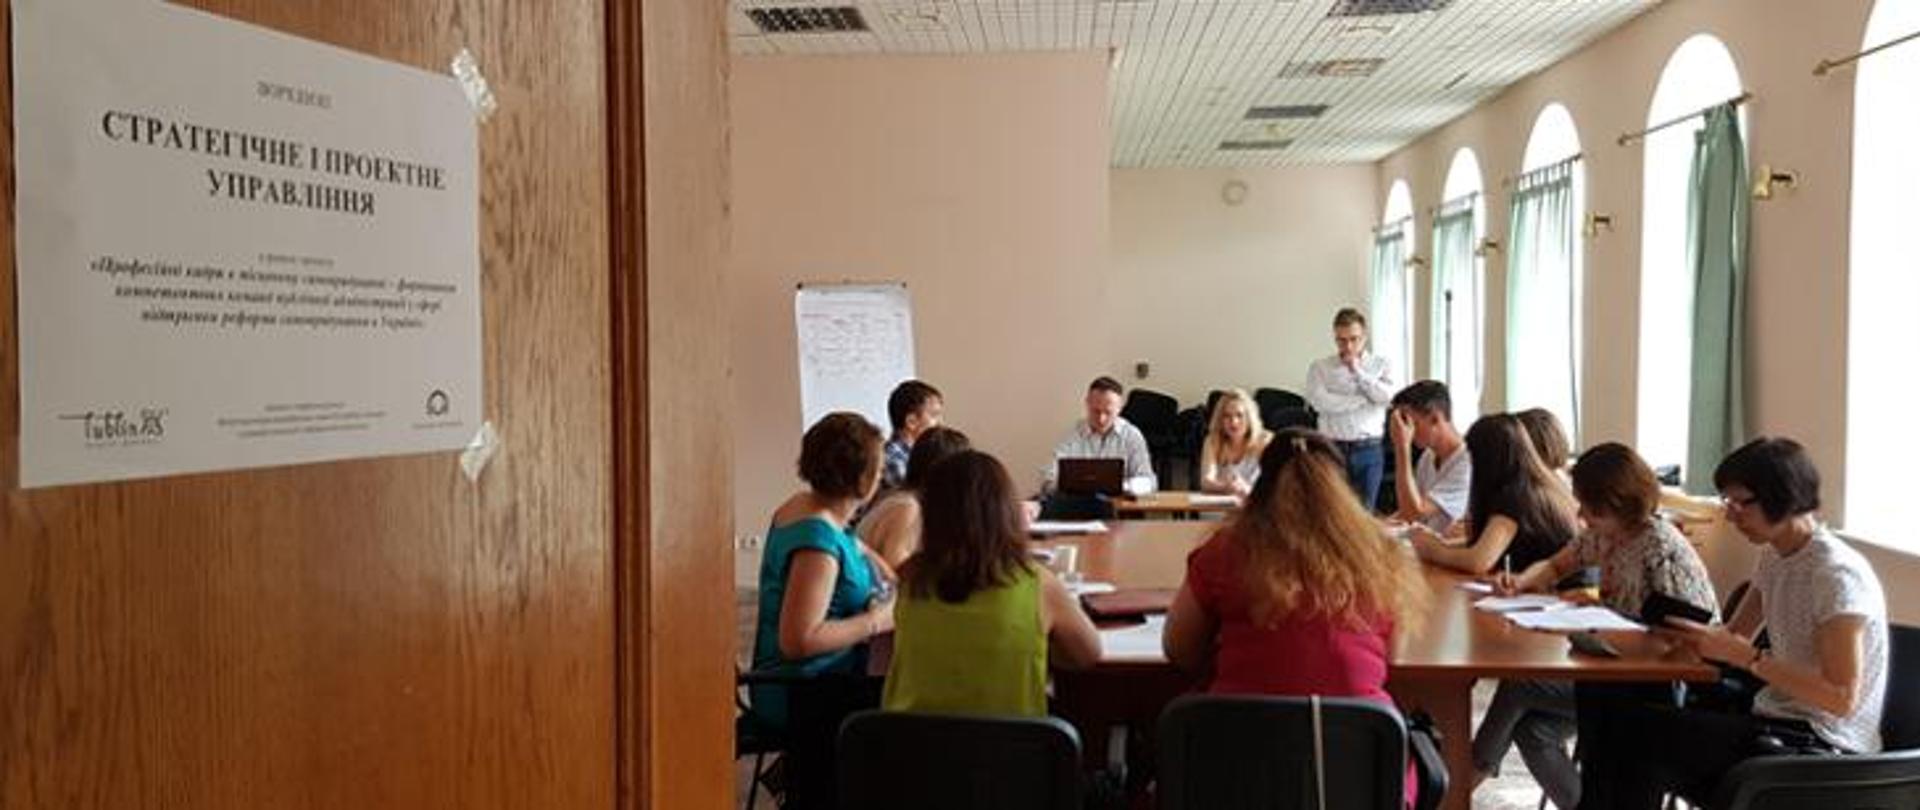 Professional personnel in local government – creating competent public administration teams to support local government reform in Ukraine